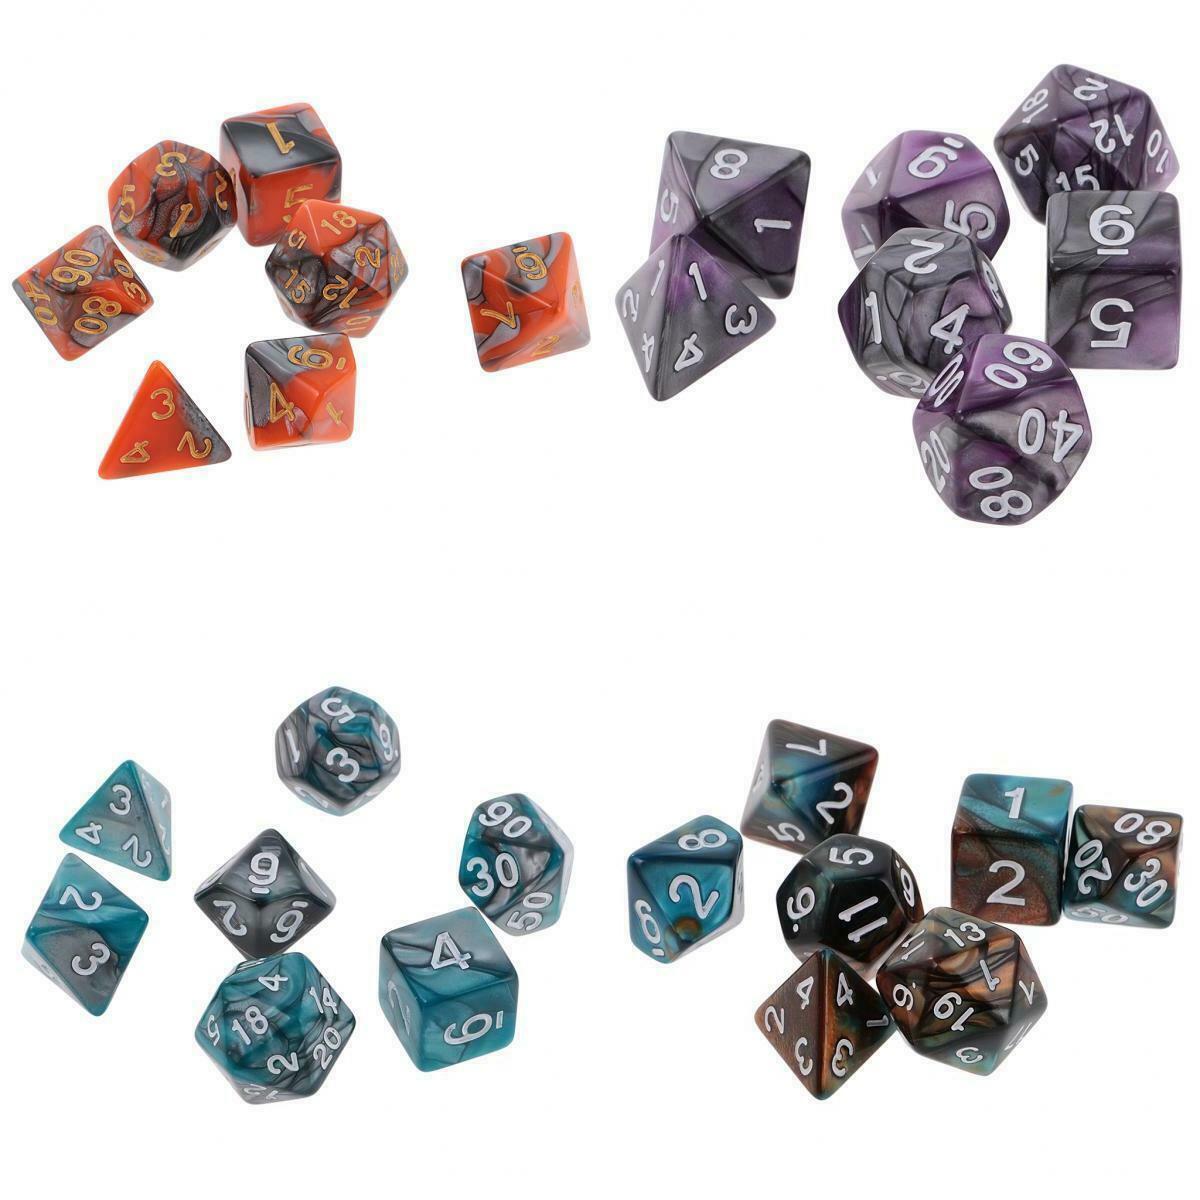 28x Two Colors Polyhedral Dice for D&D DND RPG MTG Table Games Tabletop